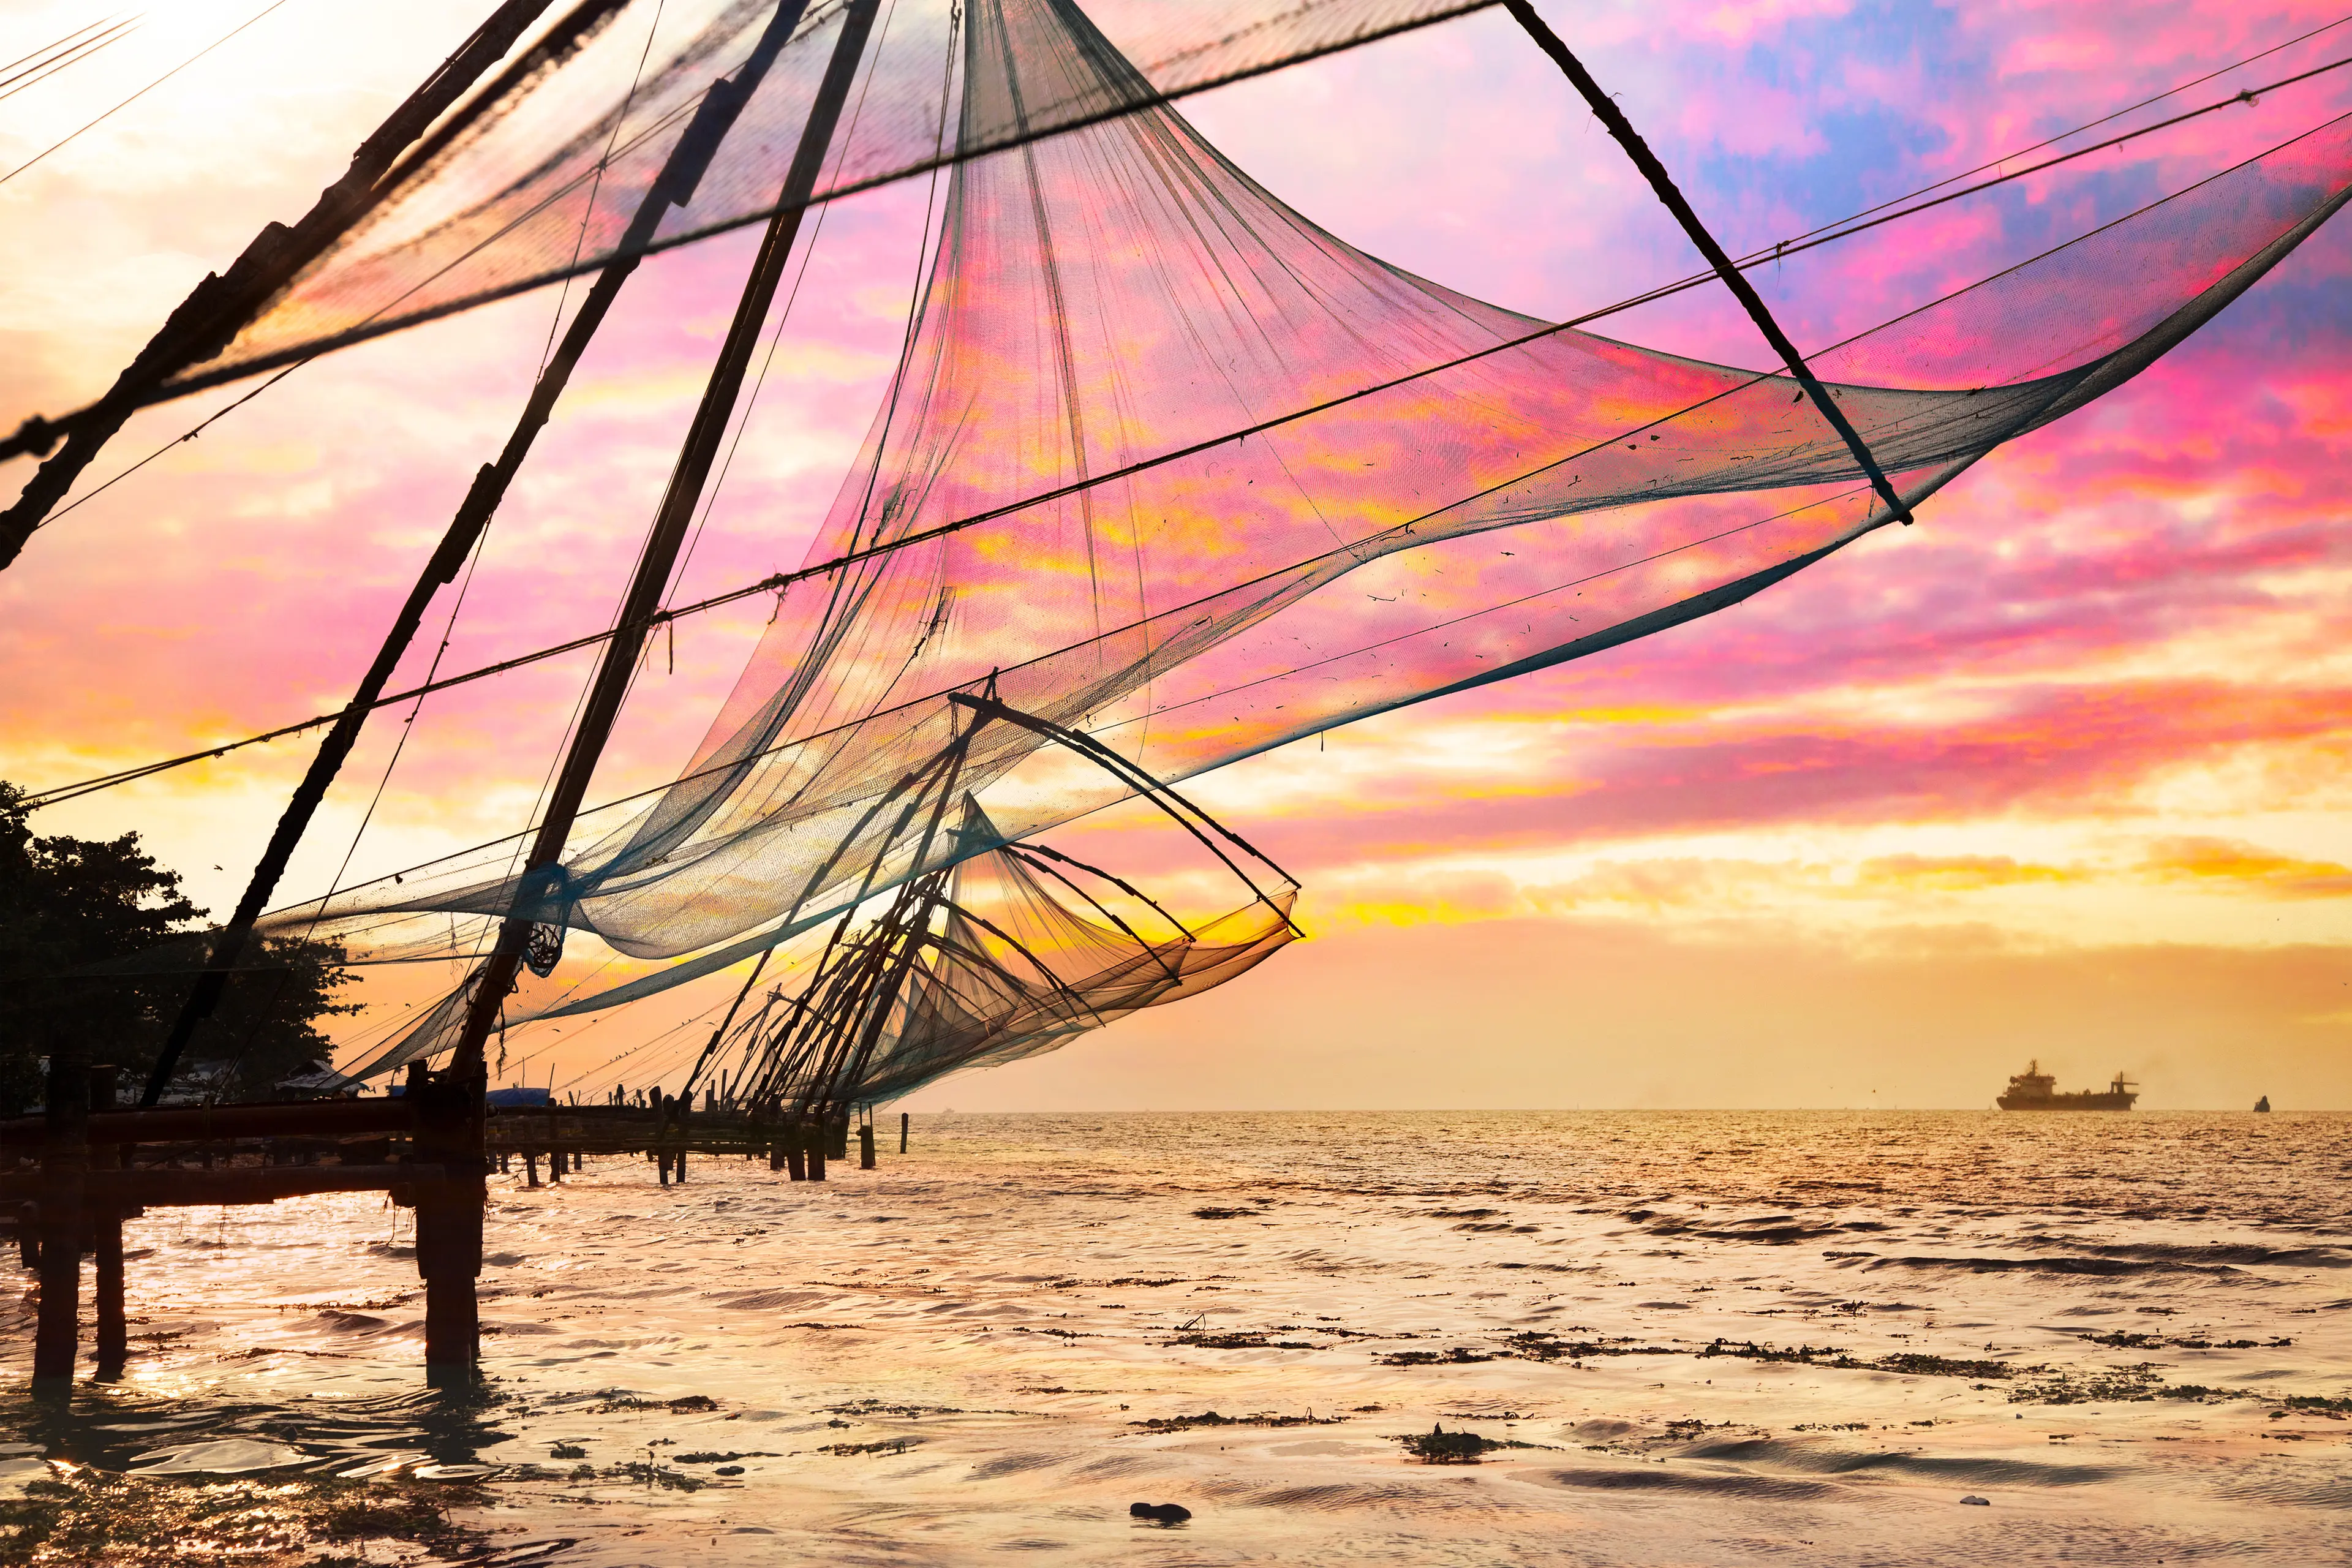 3-Day Romantic Local Experience in Kochi: Sightseeing, Cuisine & Nightlife